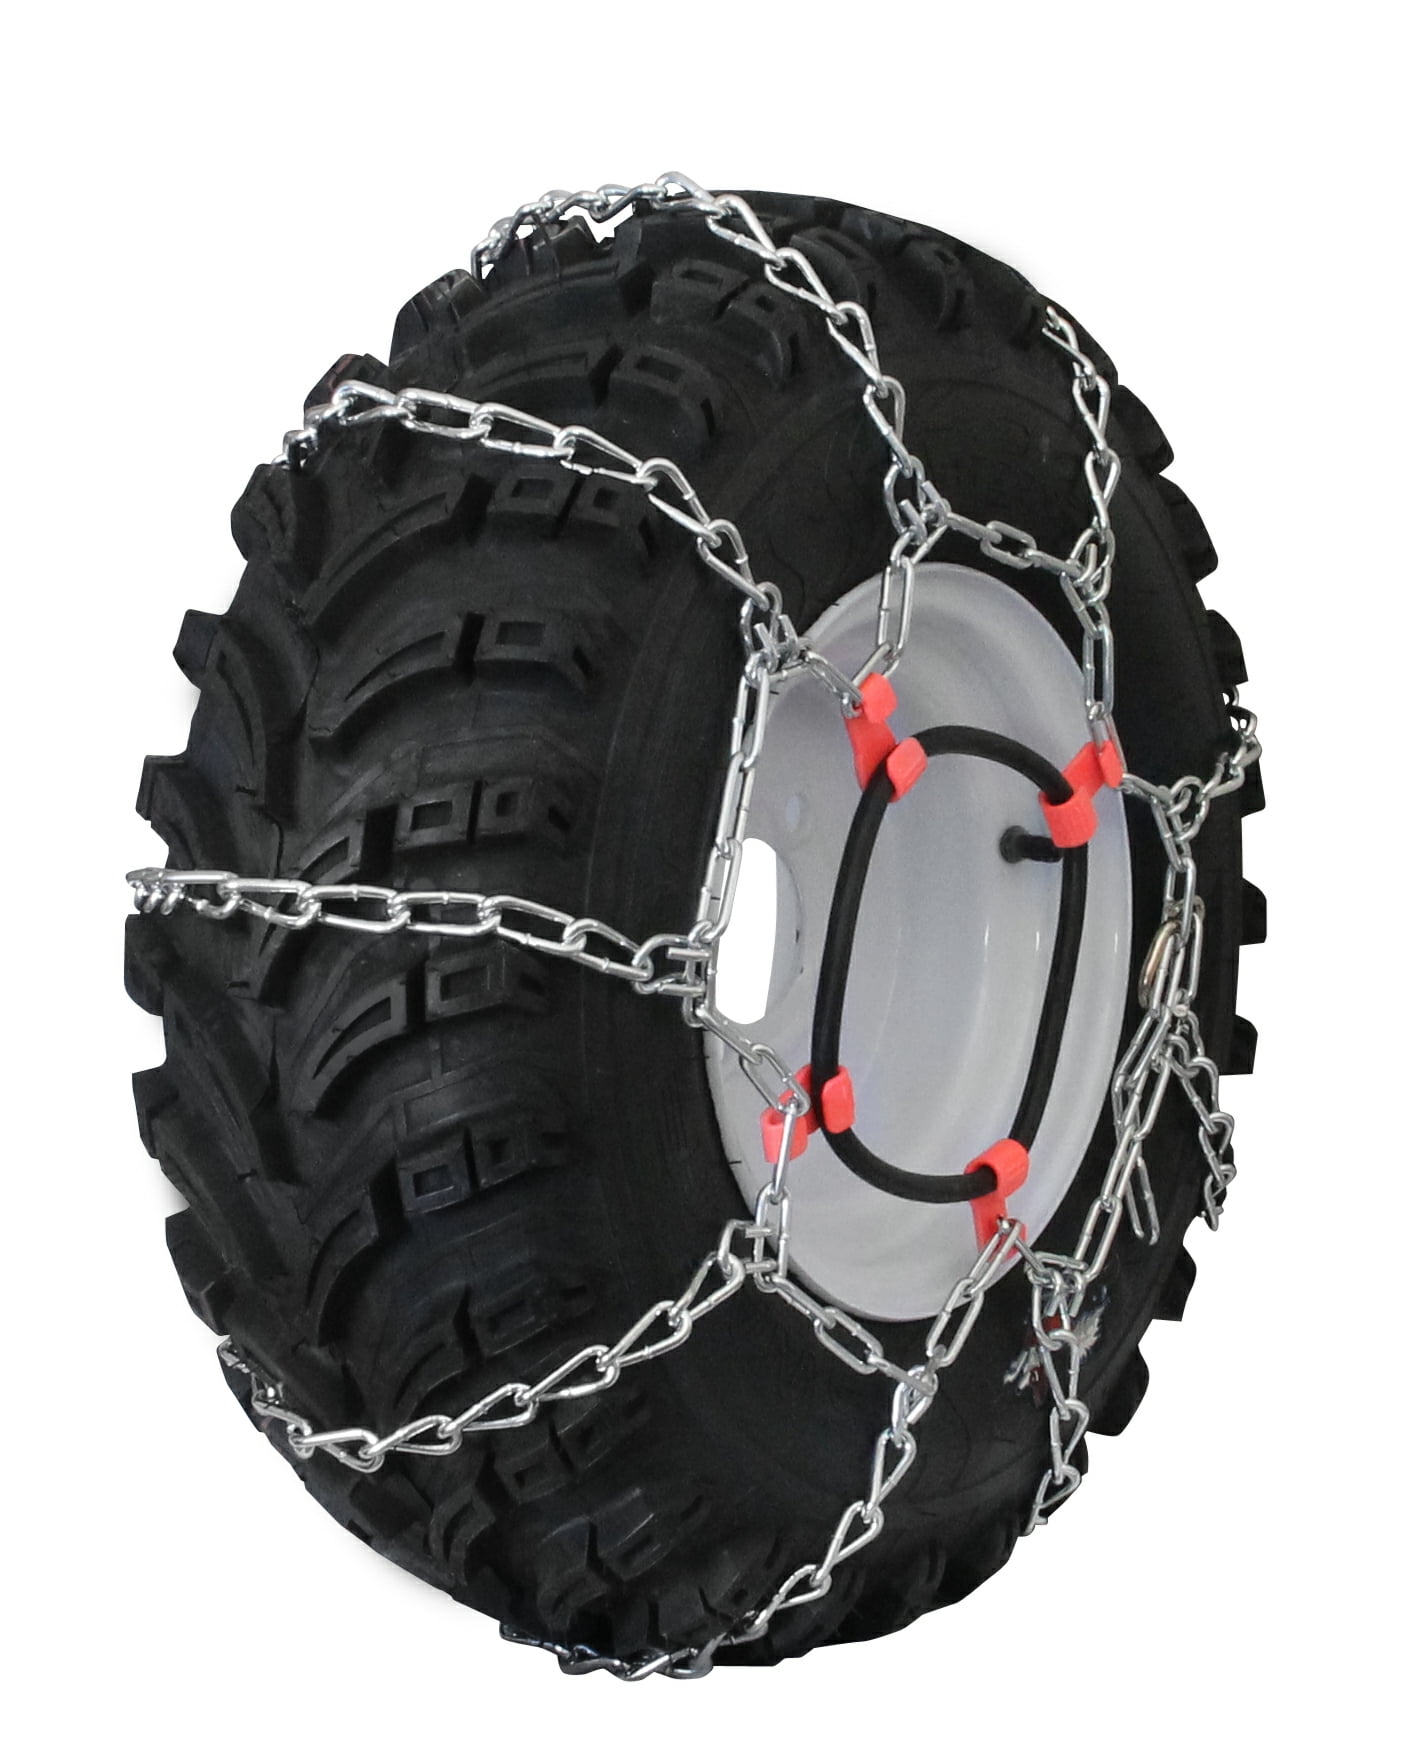 Details about   PAIR 2 Link TIRE CHAINS 20x10.00x8 for Simplicty Lawn Mower Garden Tractor Rider 